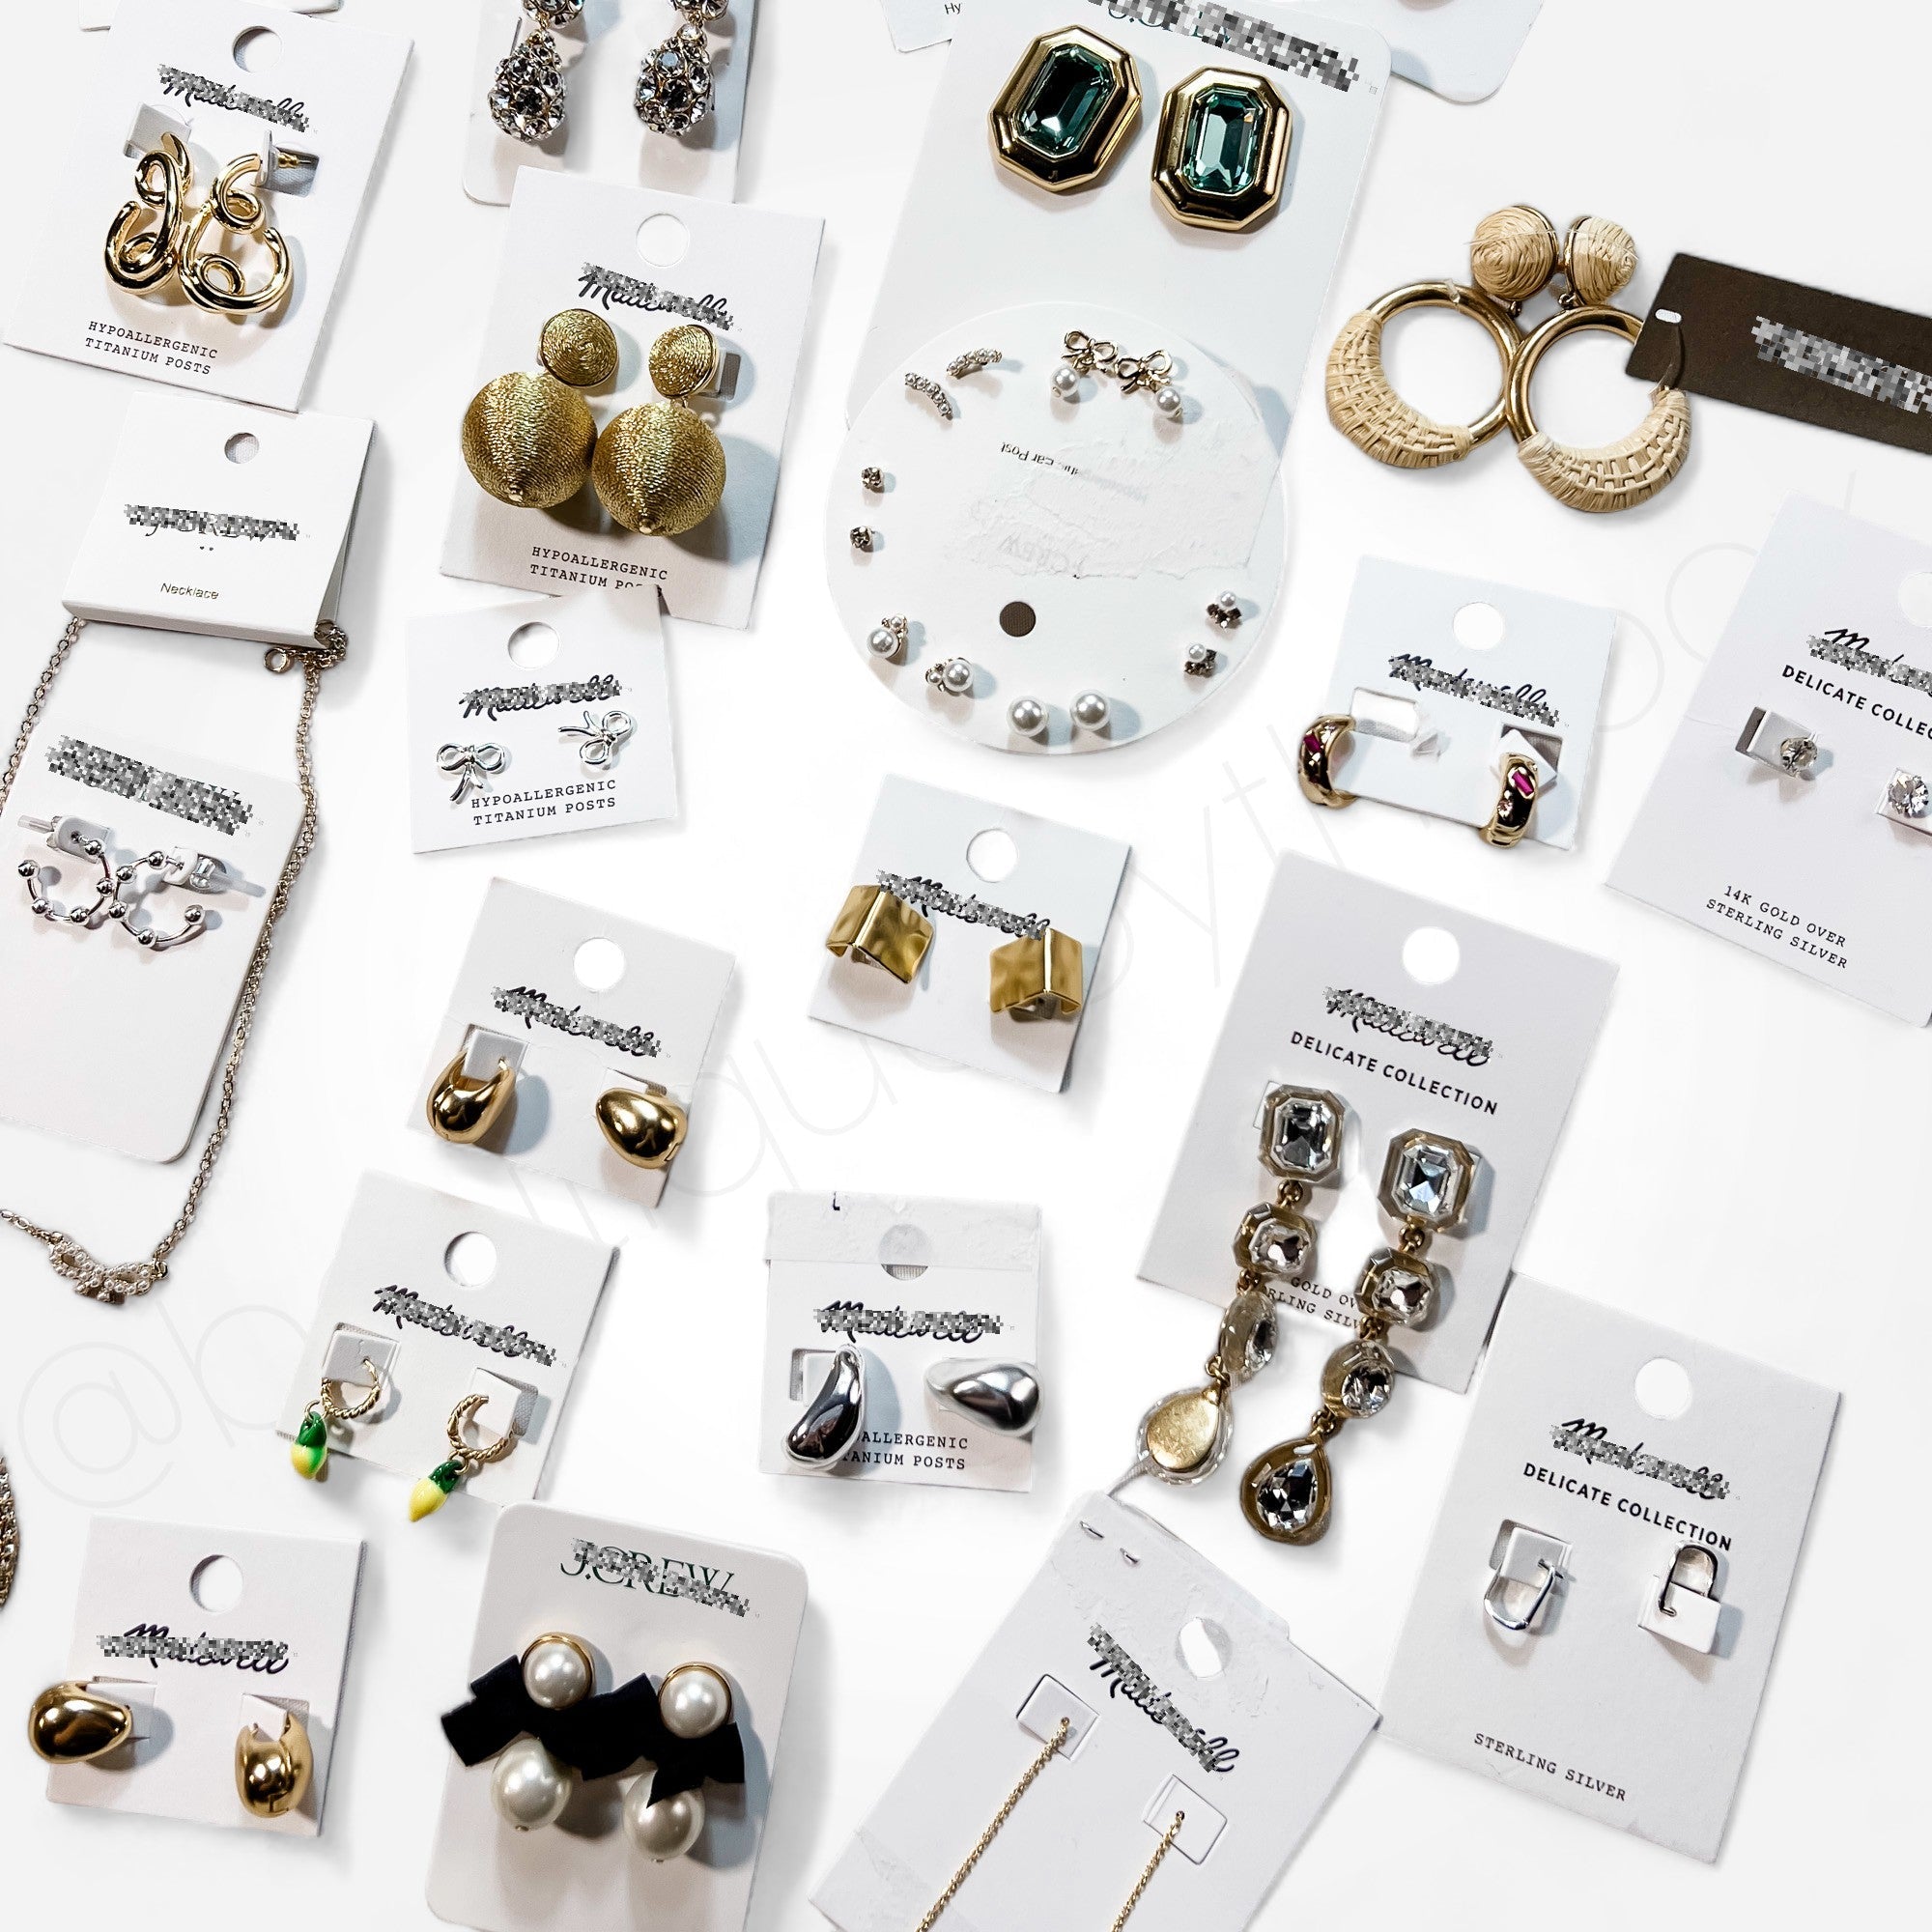 MDWLL + JCRW Jewelry & Accessories New + Customer Returns Wholesale - Boutique by the Box Wholesale for Resellers